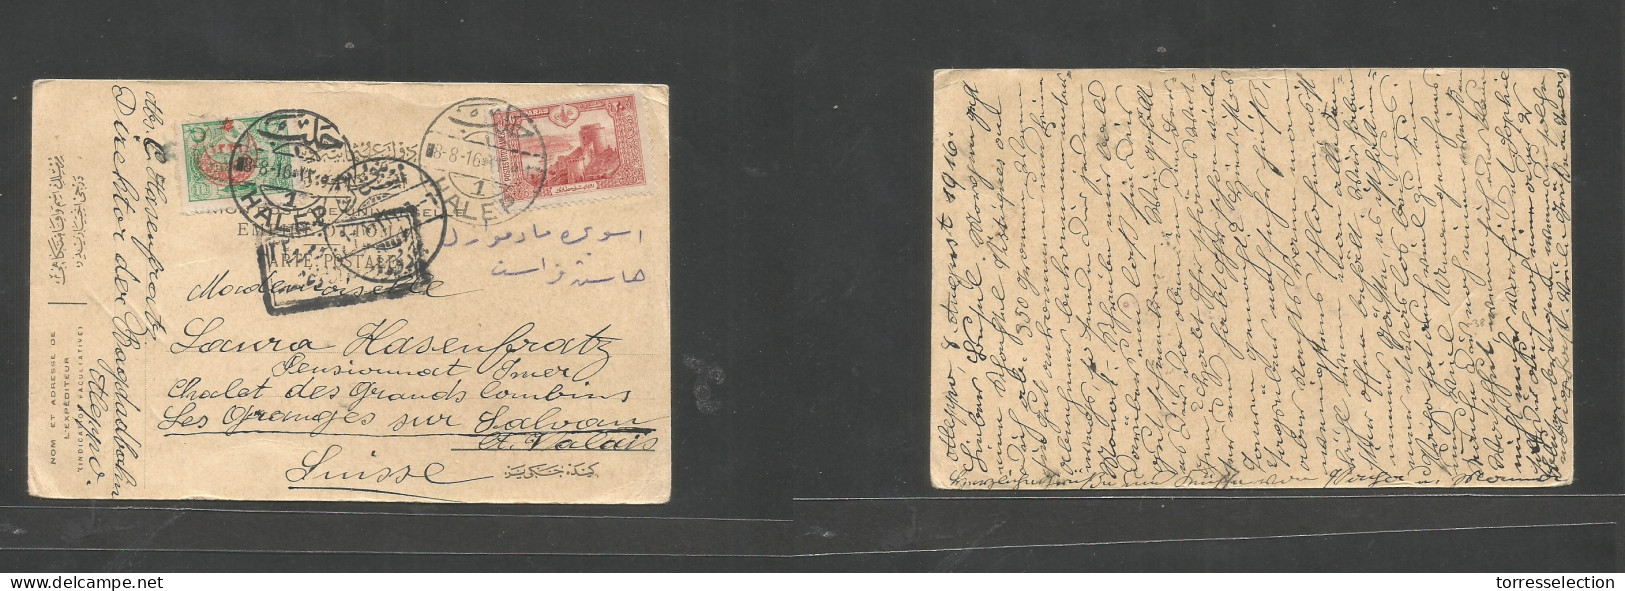 SYRIA. 1916 (8 Aug) Turkish Admin, Halep - Switzerland, Lausanne. Multifkd Private Card At 20p Rate, Tied Bilingual Cds  - Syrien